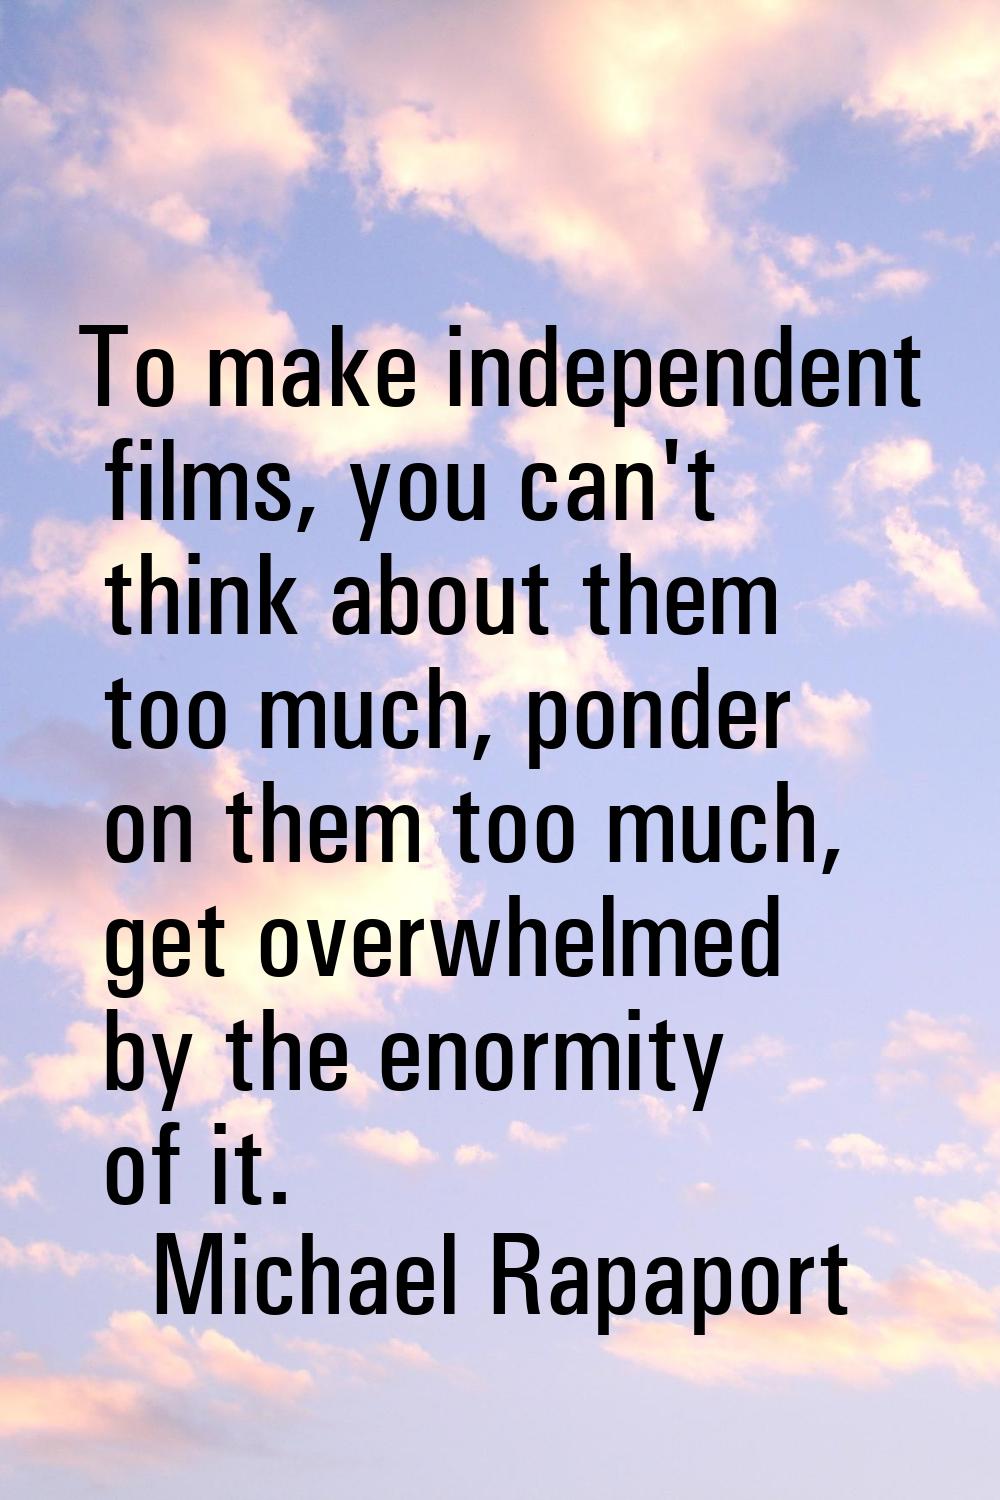 To make independent films, you can't think about them too much, ponder on them too much, get overwh